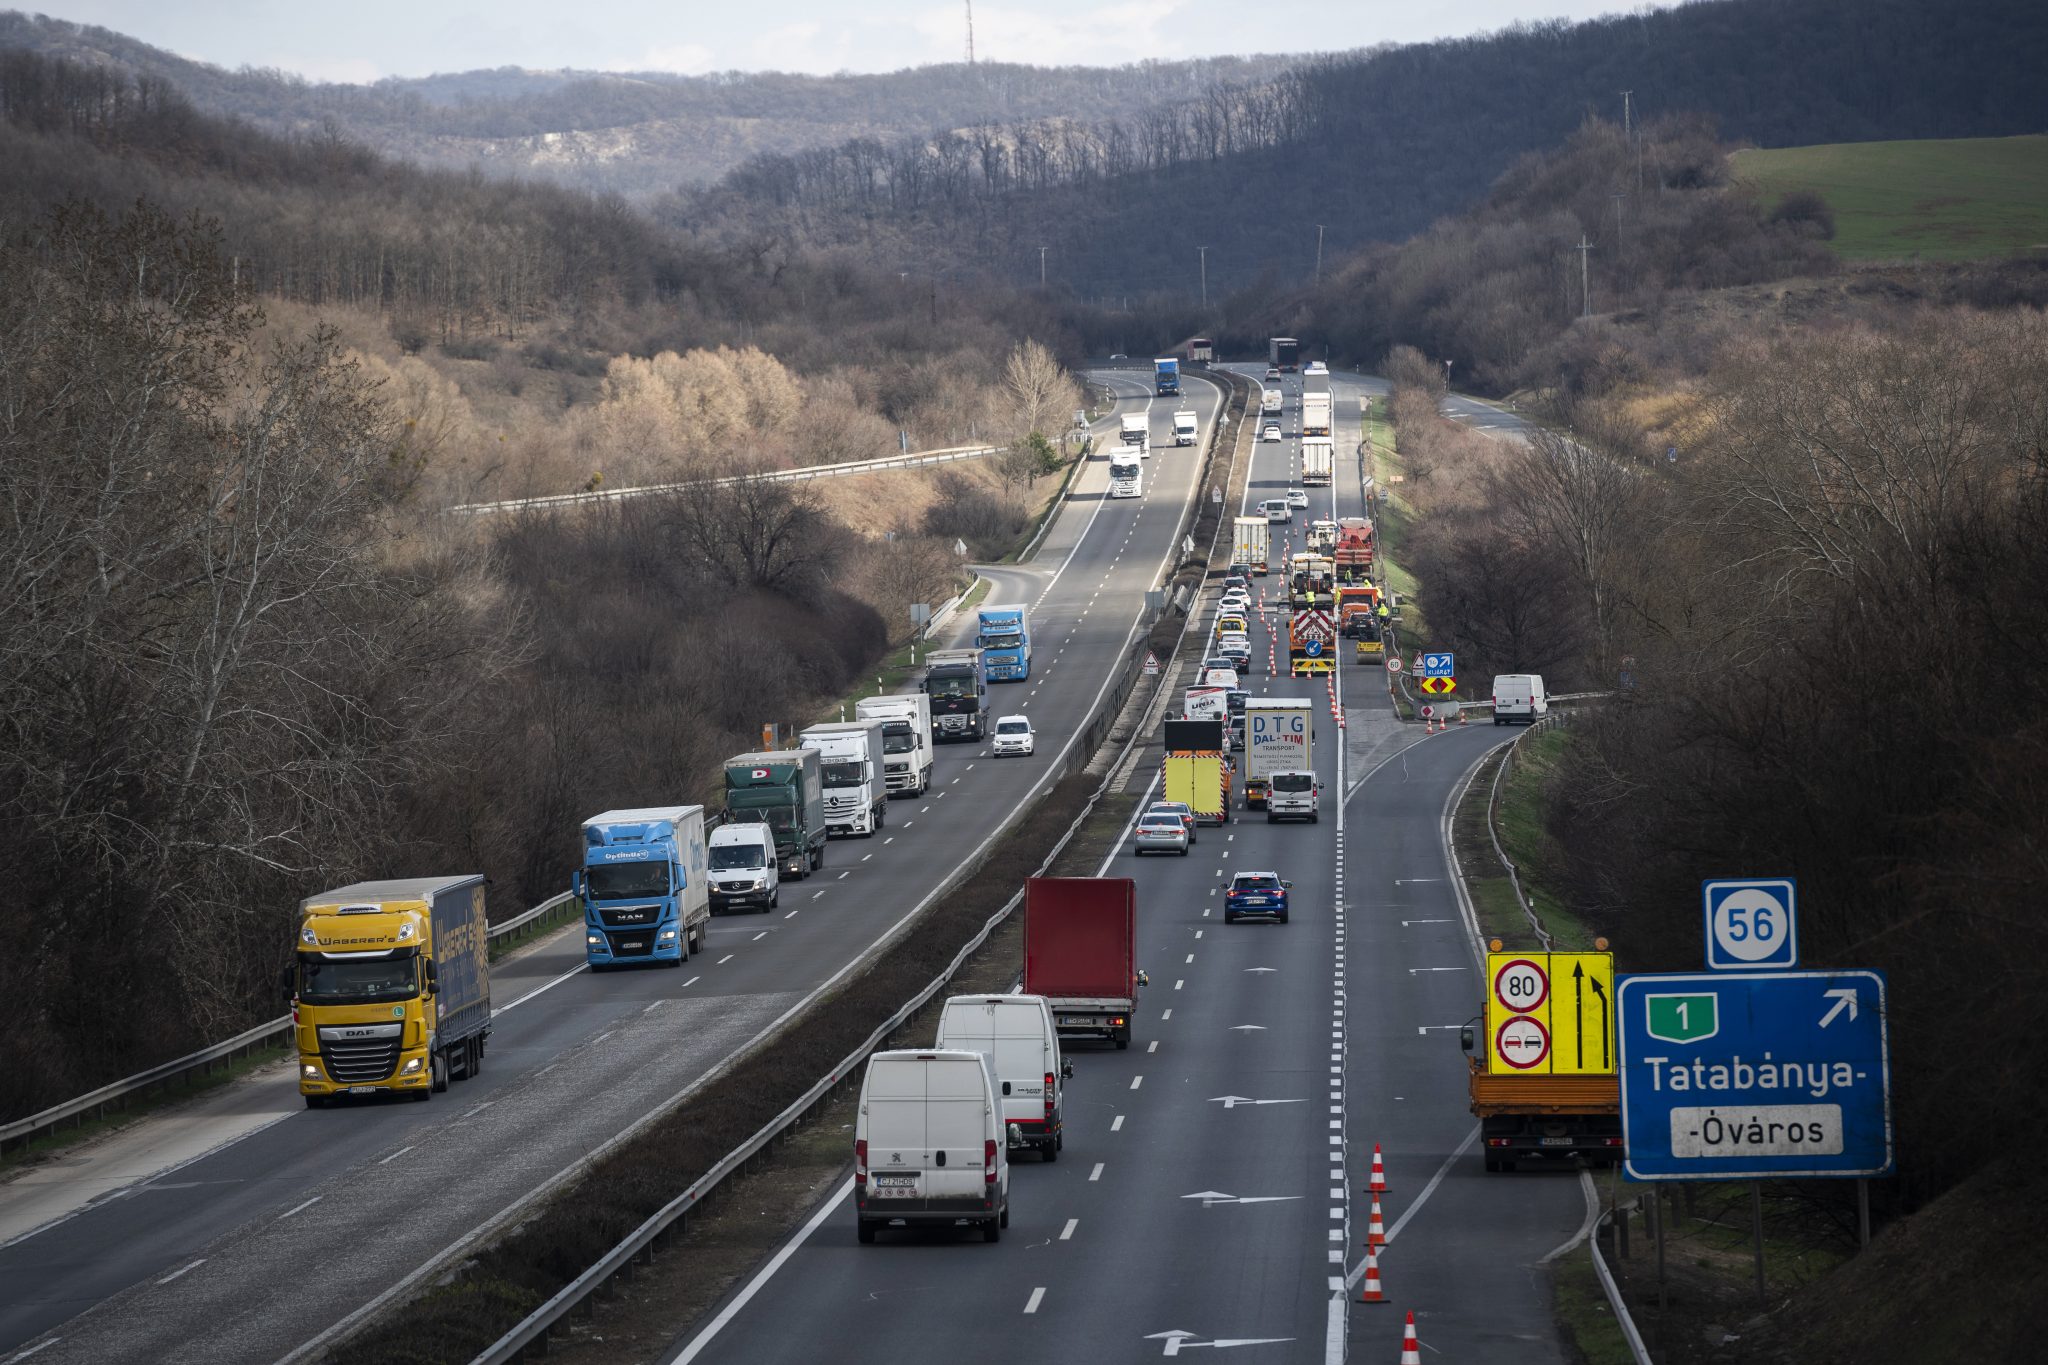 Orbán Gov't to Place Hungary's Motorway Network in Private Hands for 35 Years